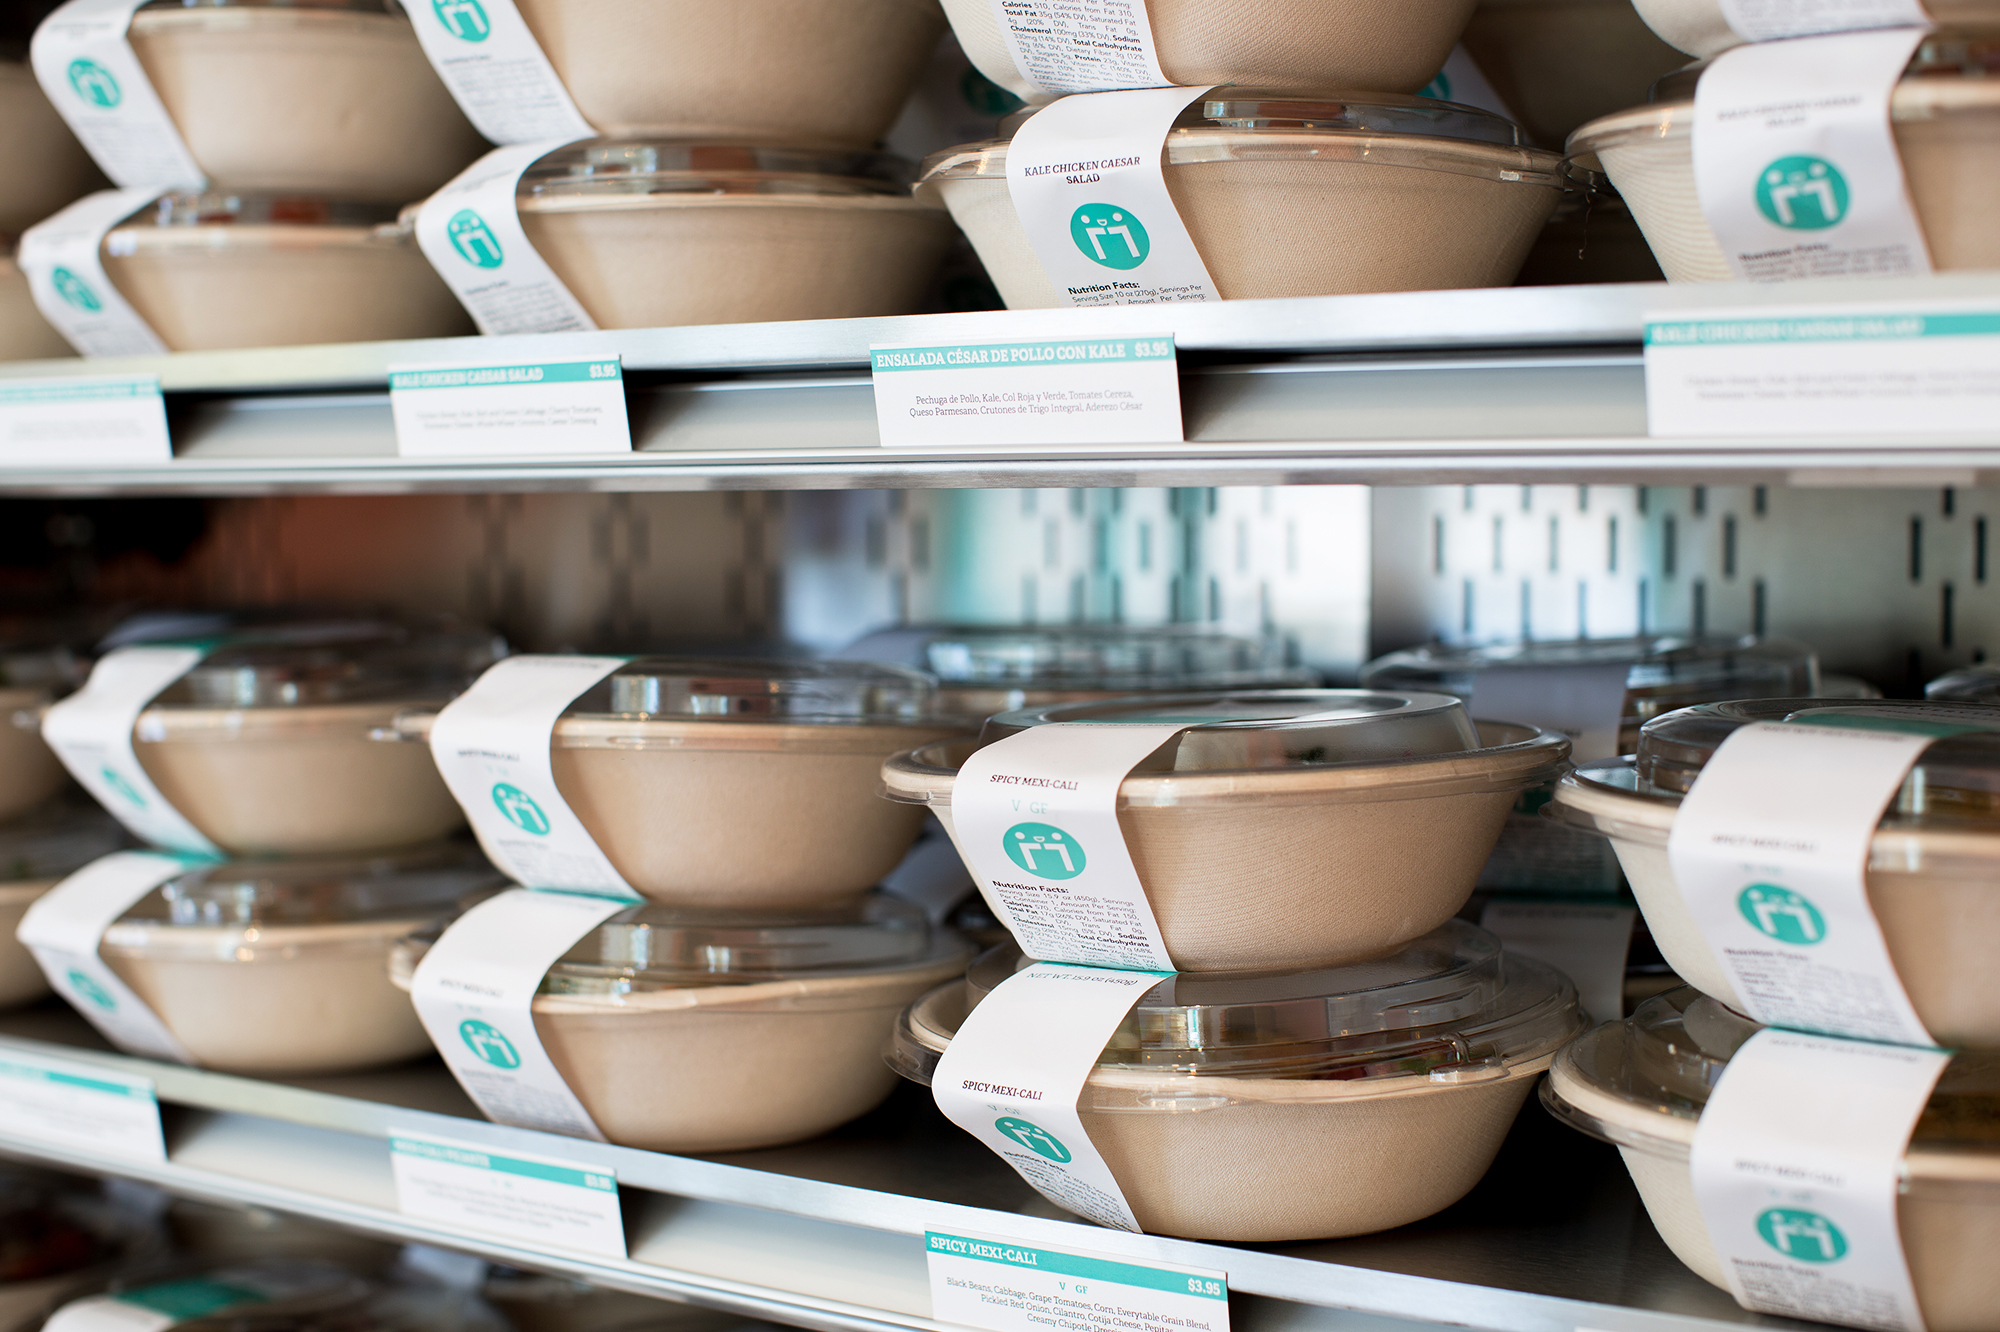 Everytable's meals are prepared in a central kitchen, then packaged in to-go containers. Customers can heat them and eat them at the restaurant or take them home for later.